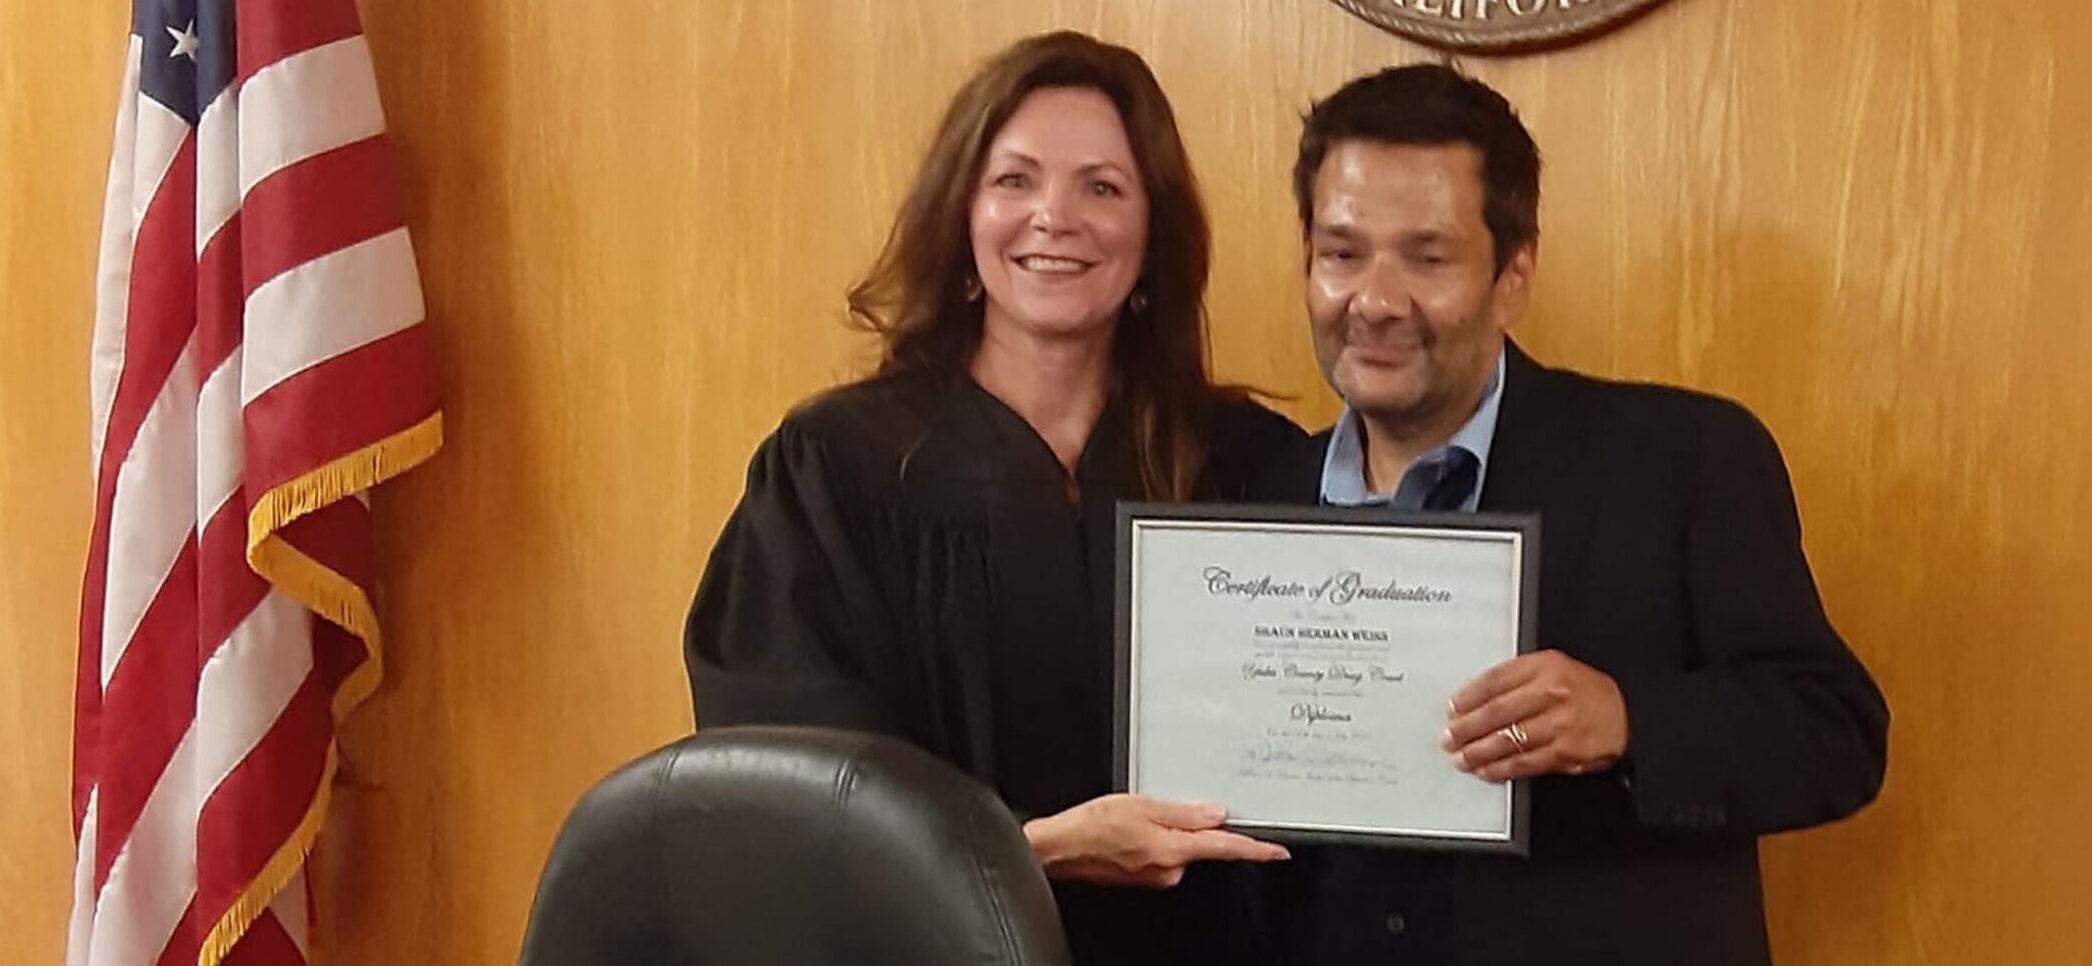 Former Mighty Ducks child star Shaun Weiss graduates from a court-ordered drug program as he gets his life back on track